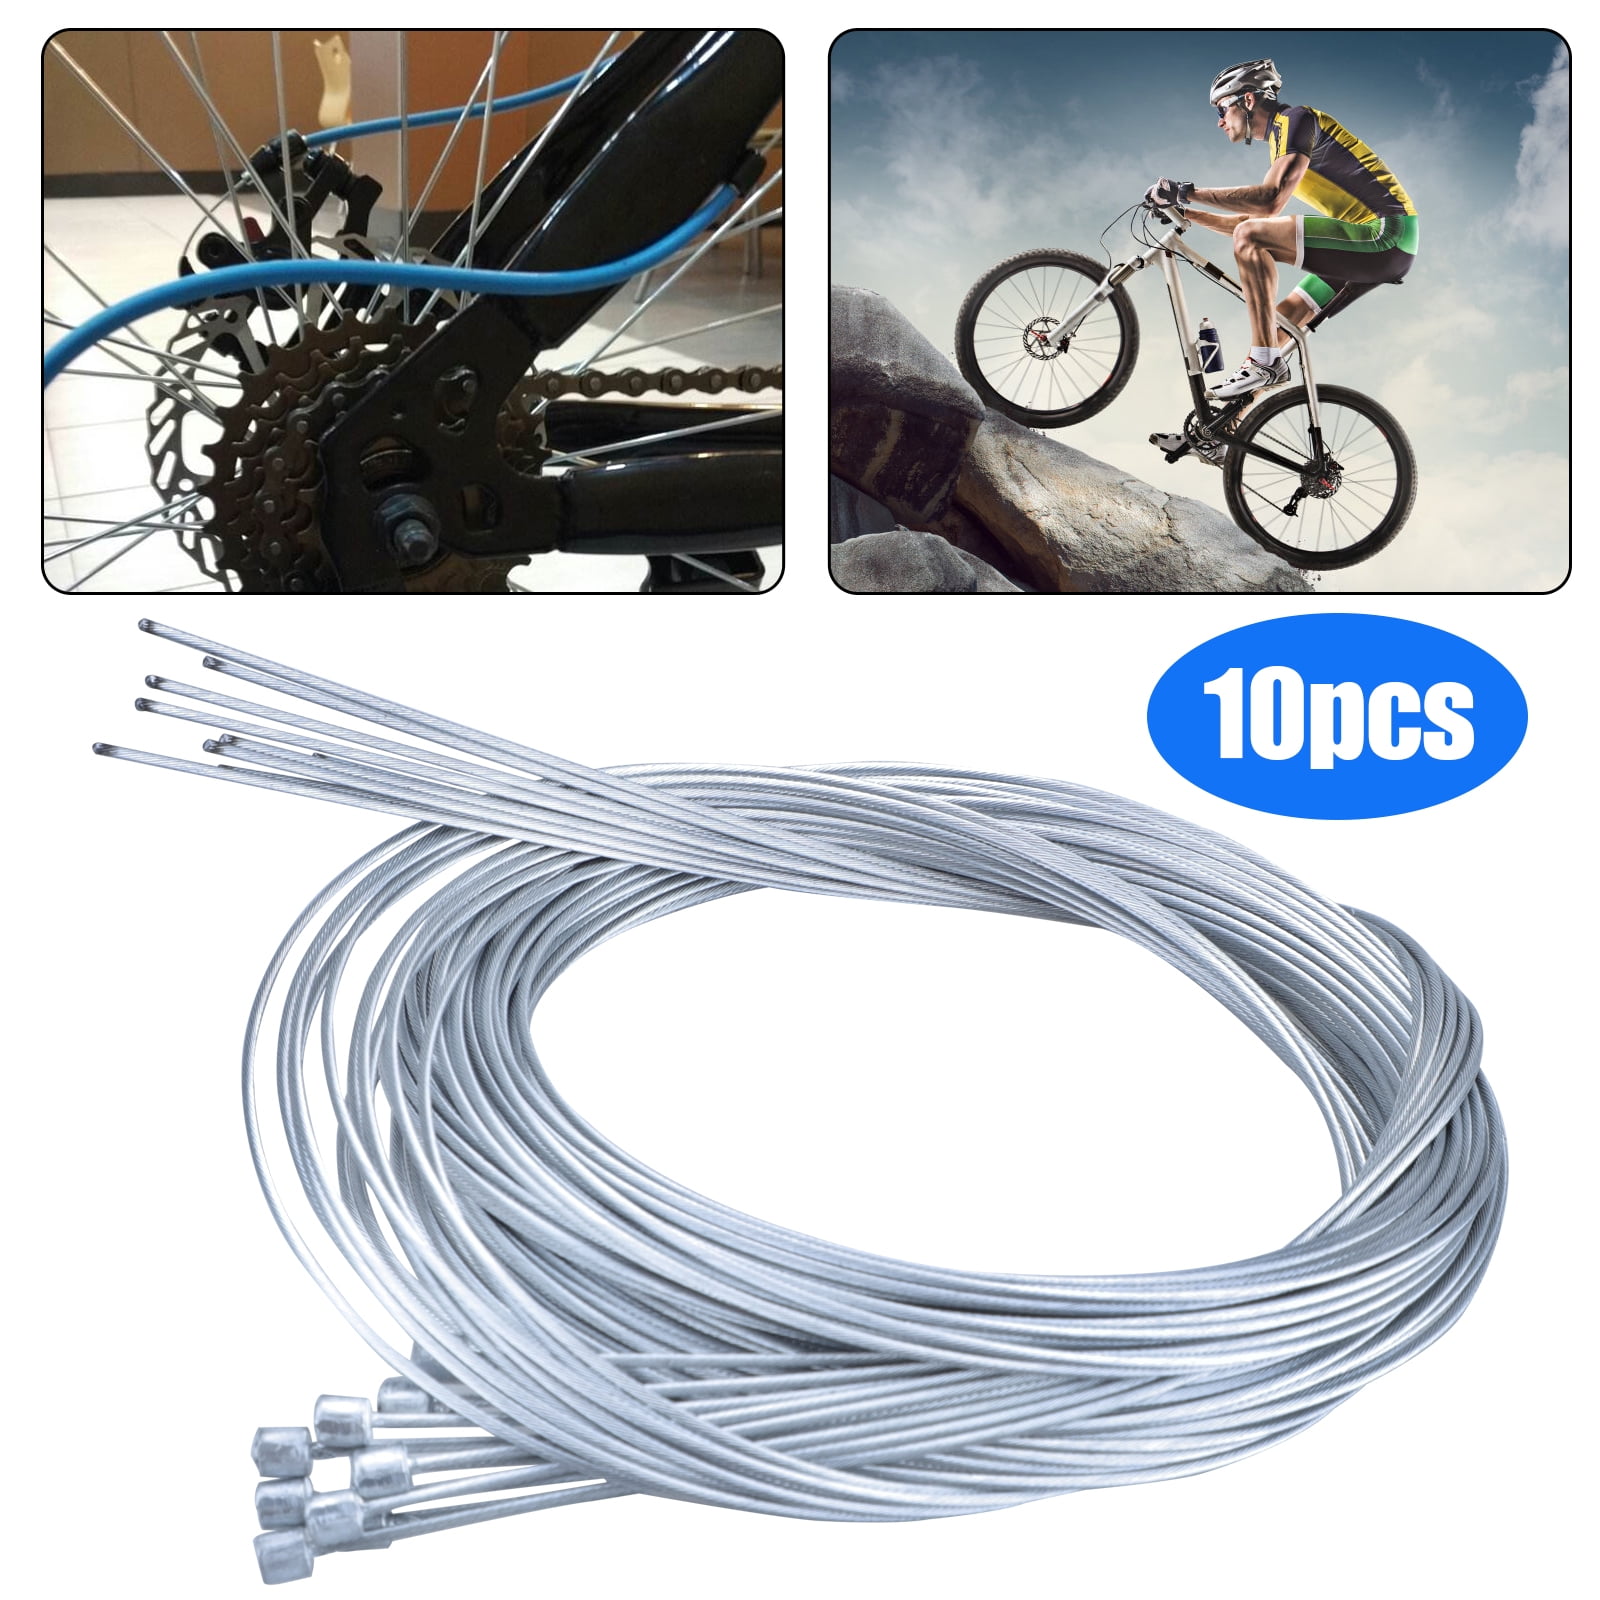 Bestgle Universal Mountain Bike Brake Cable Set and Bicycle Gear Shift Derailleur Cable Complete Replacemen Set with Cable Ends Caps Crimps Kit for MTB Road Bike Housing & Cables